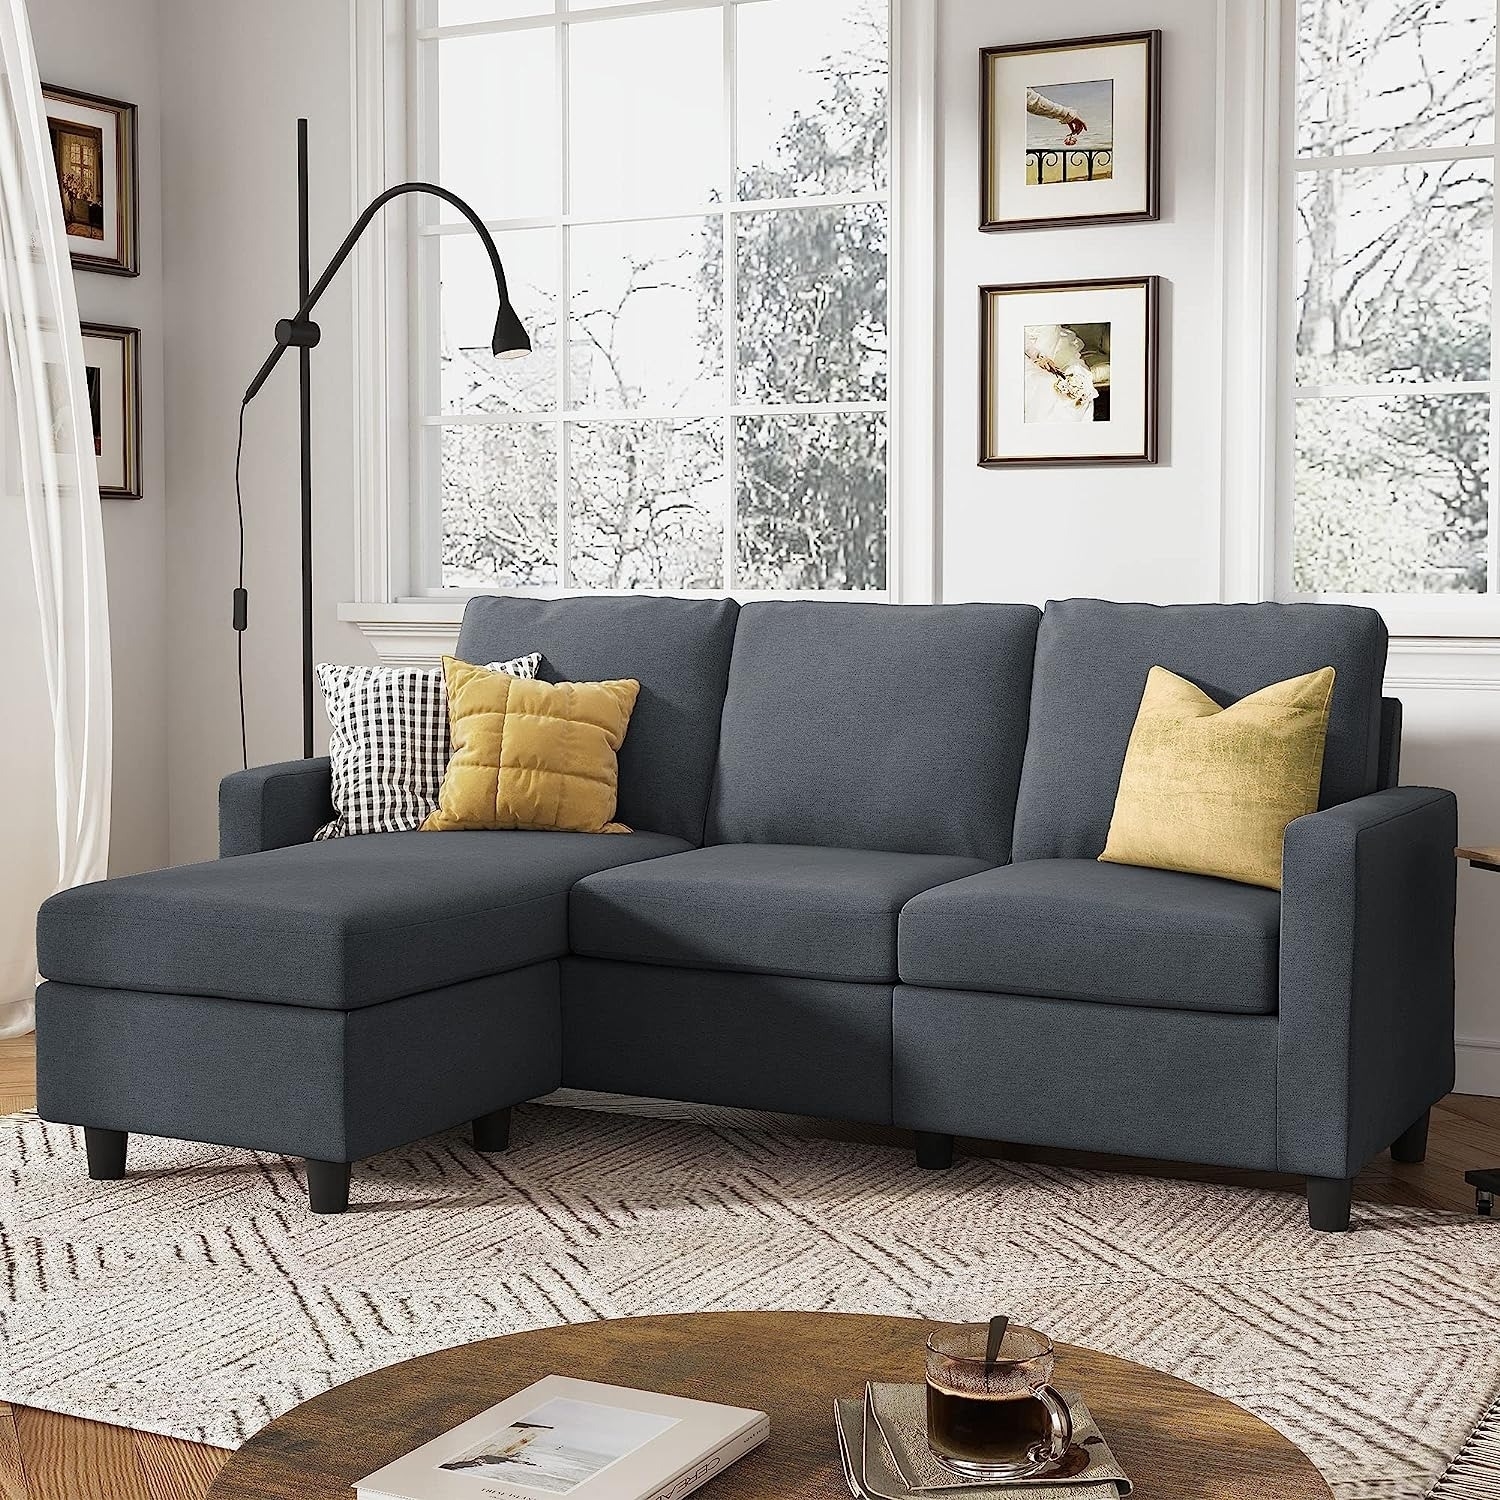 gray sectional sofa in living room